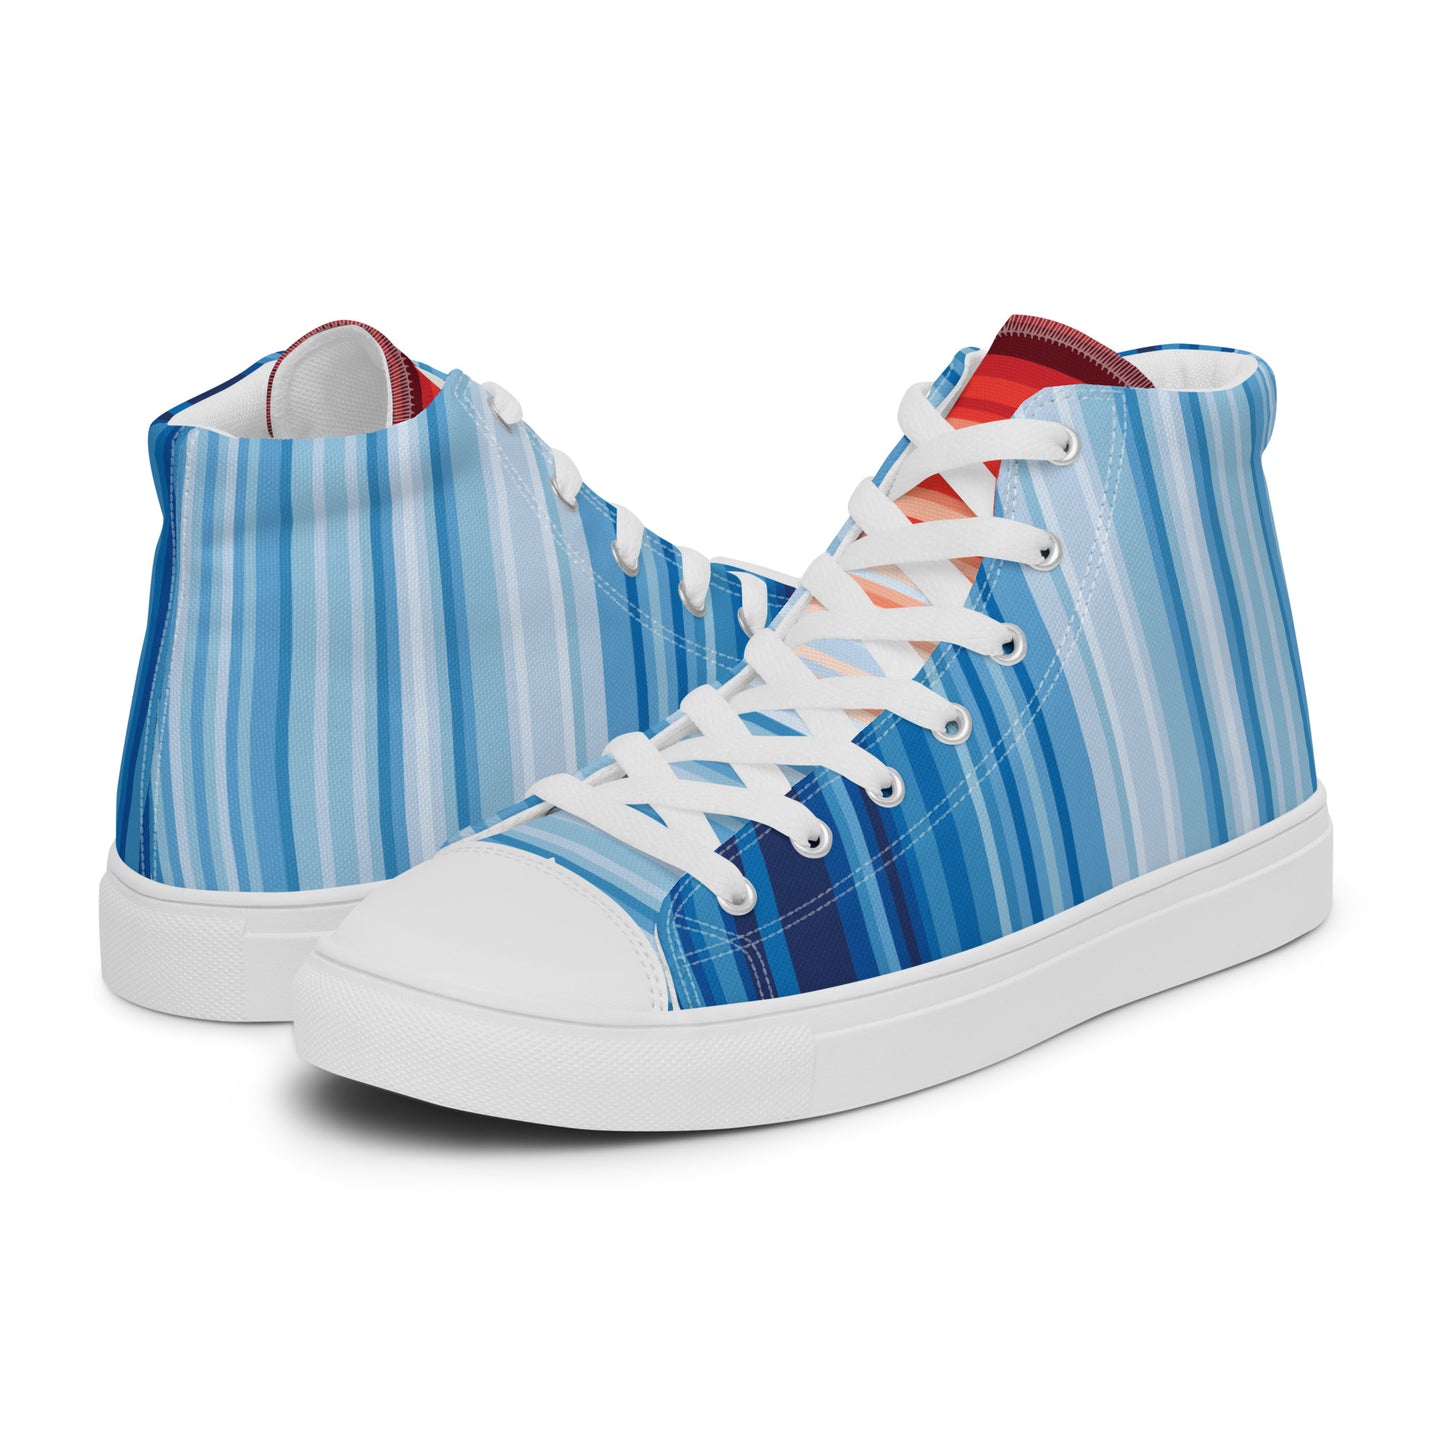 Climate Change Global Warming Stripes - Sustainably Made Men’s high top canvas shoes